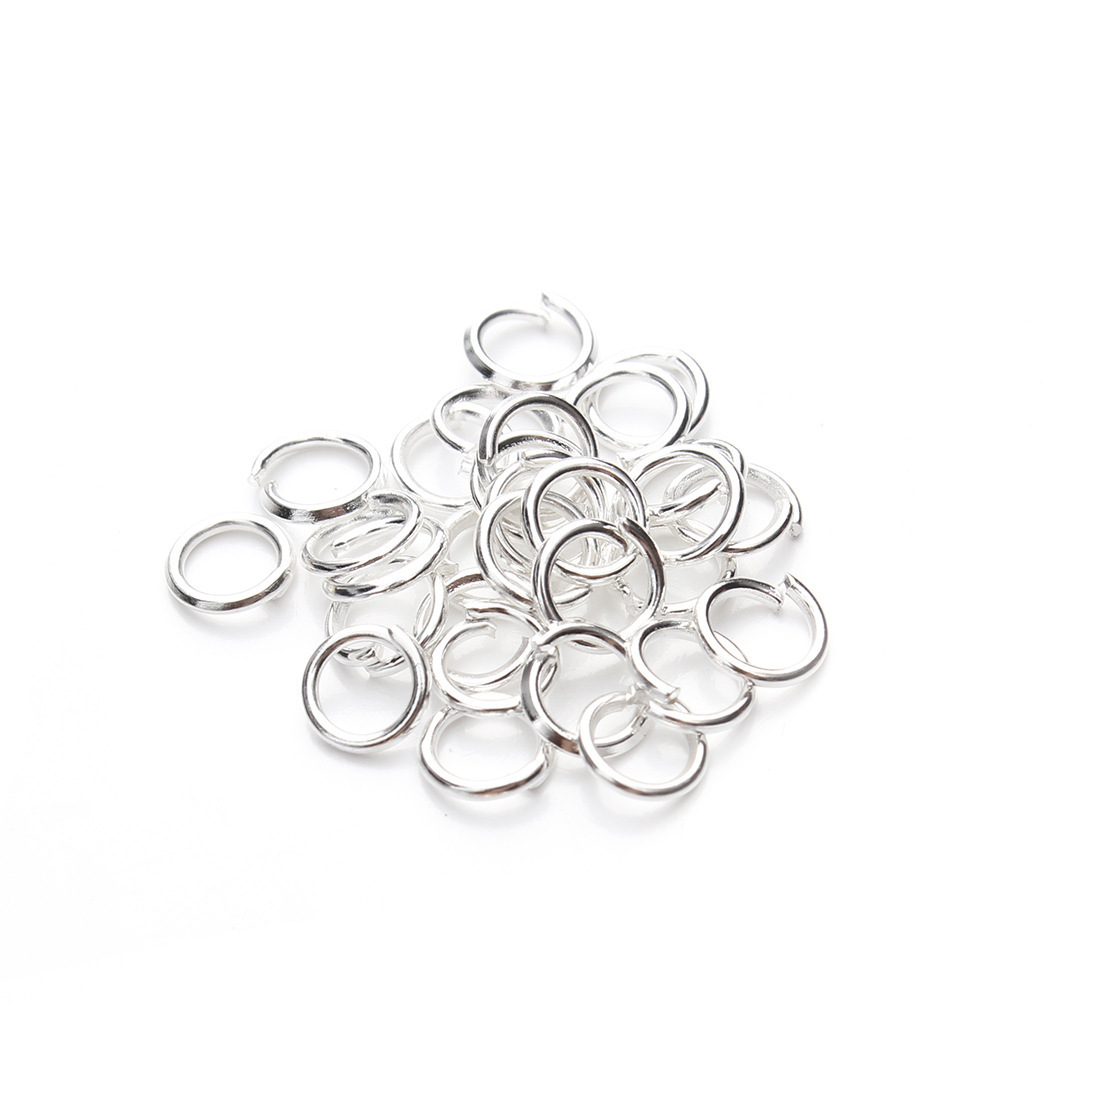 Silver outer diameter 12mm